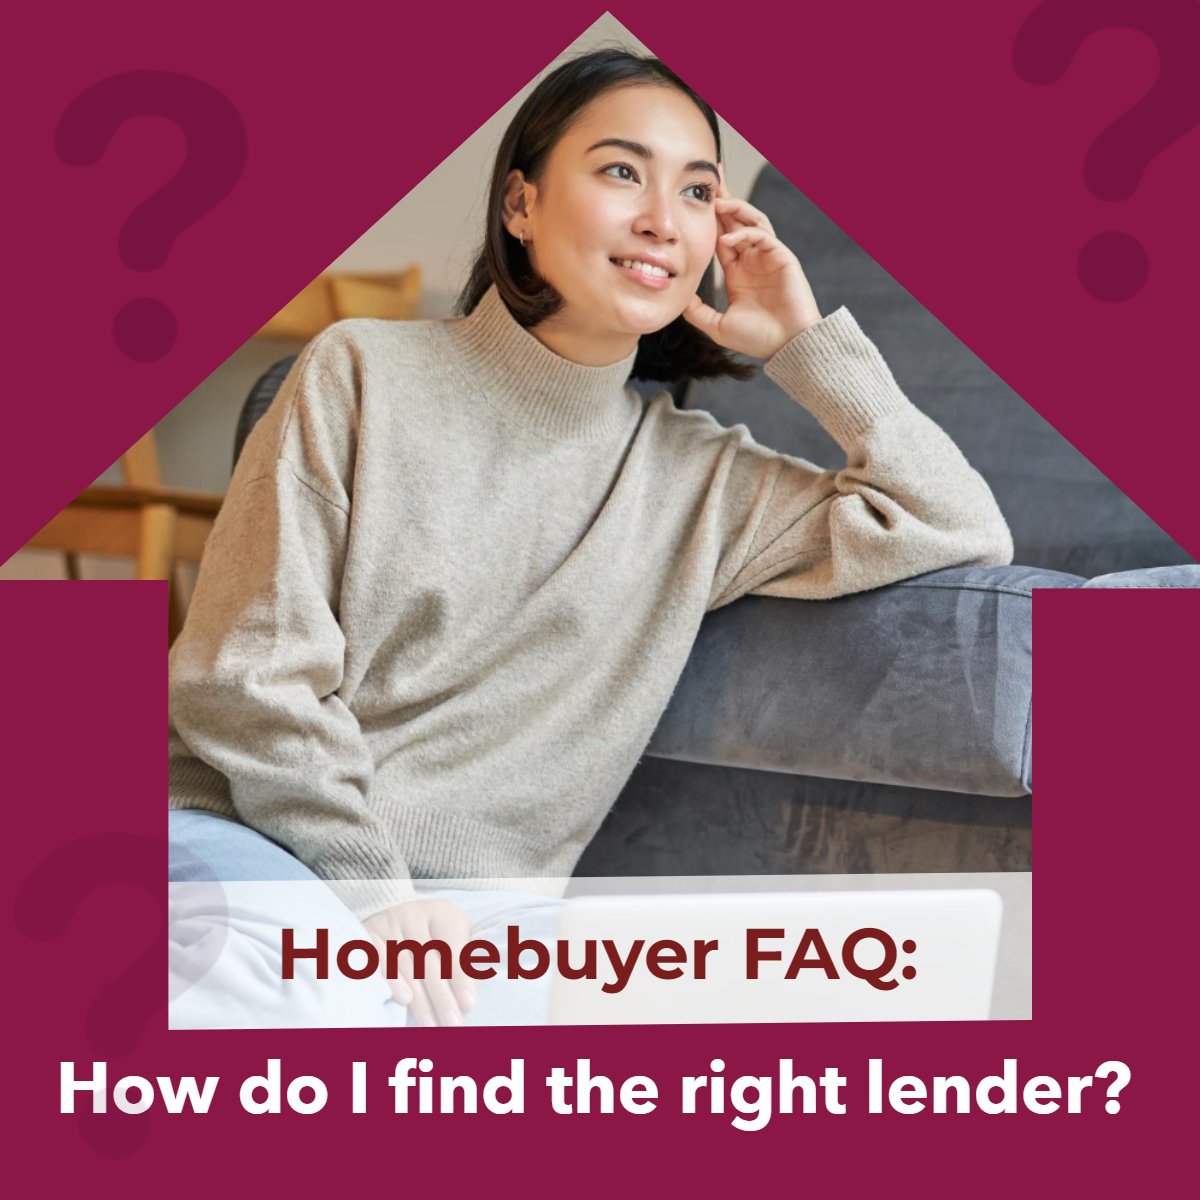 Finding the right lender for your needs is crucial!

Researching lenders, understanding your needs, and comparing offers are some of the things you need to do before choosing one. 

Do you have any other tips? Let us know below!

#RealEstate #Lenders
 #sandiegorealtor